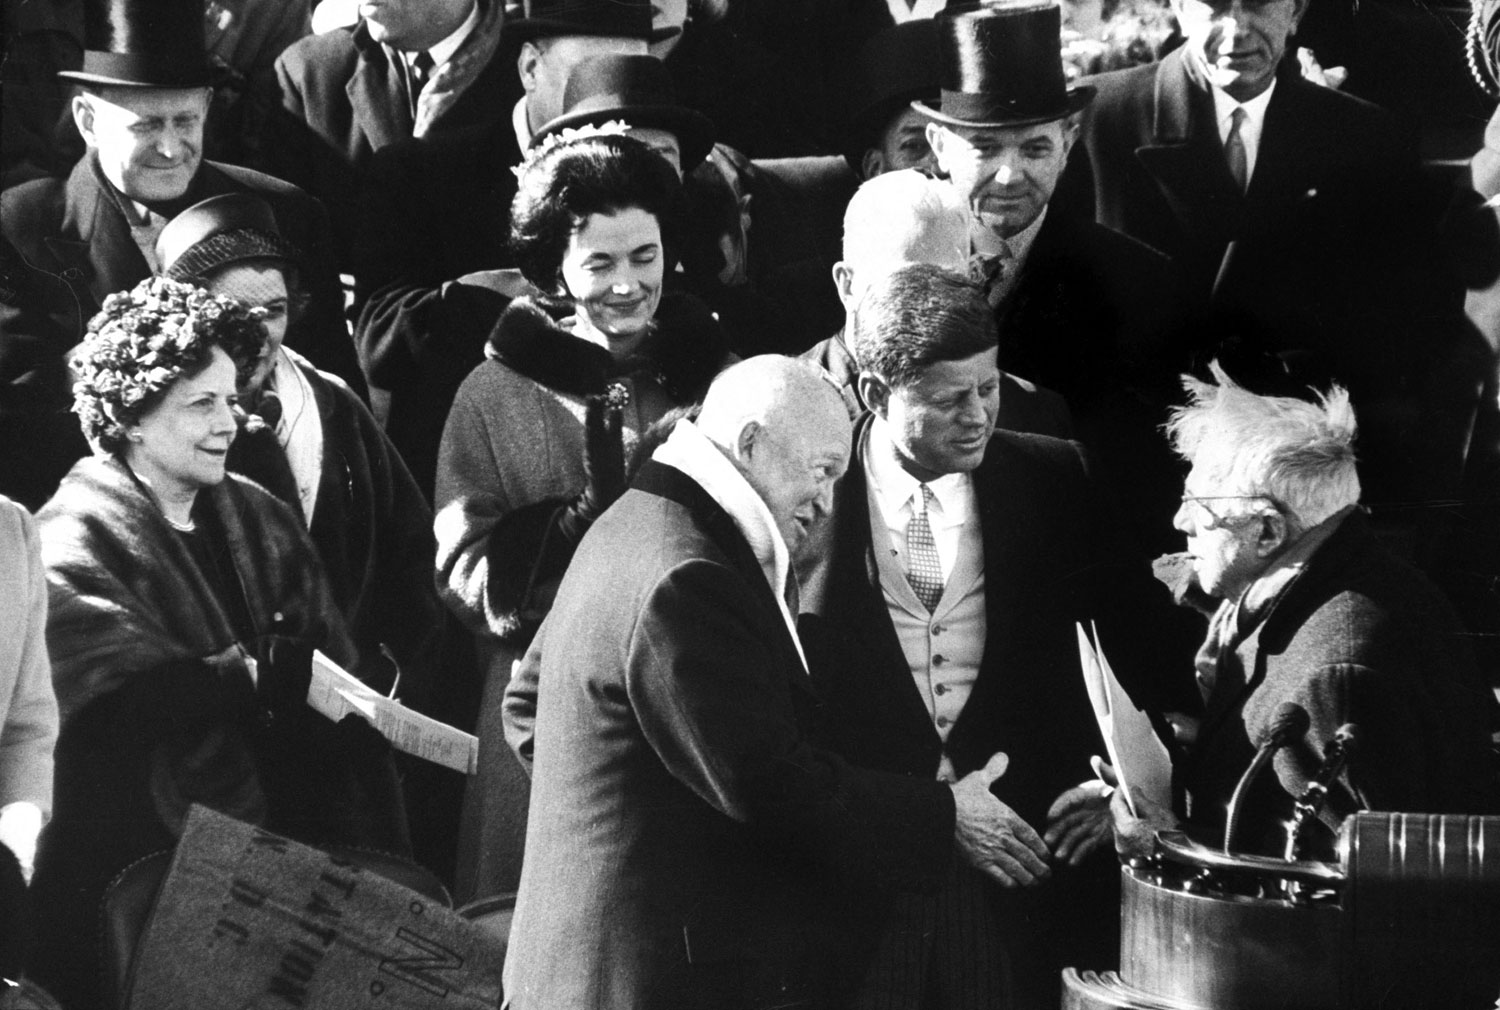 Dwight Eisenhower shakes hands with poet Robert Frost after Frost recited one of his poems from memory at the inauguration of President John F. Kennedy in 1961. (The glare of sunlight on his papers made it impossible for him to read a poem he had written expressly for the event.)